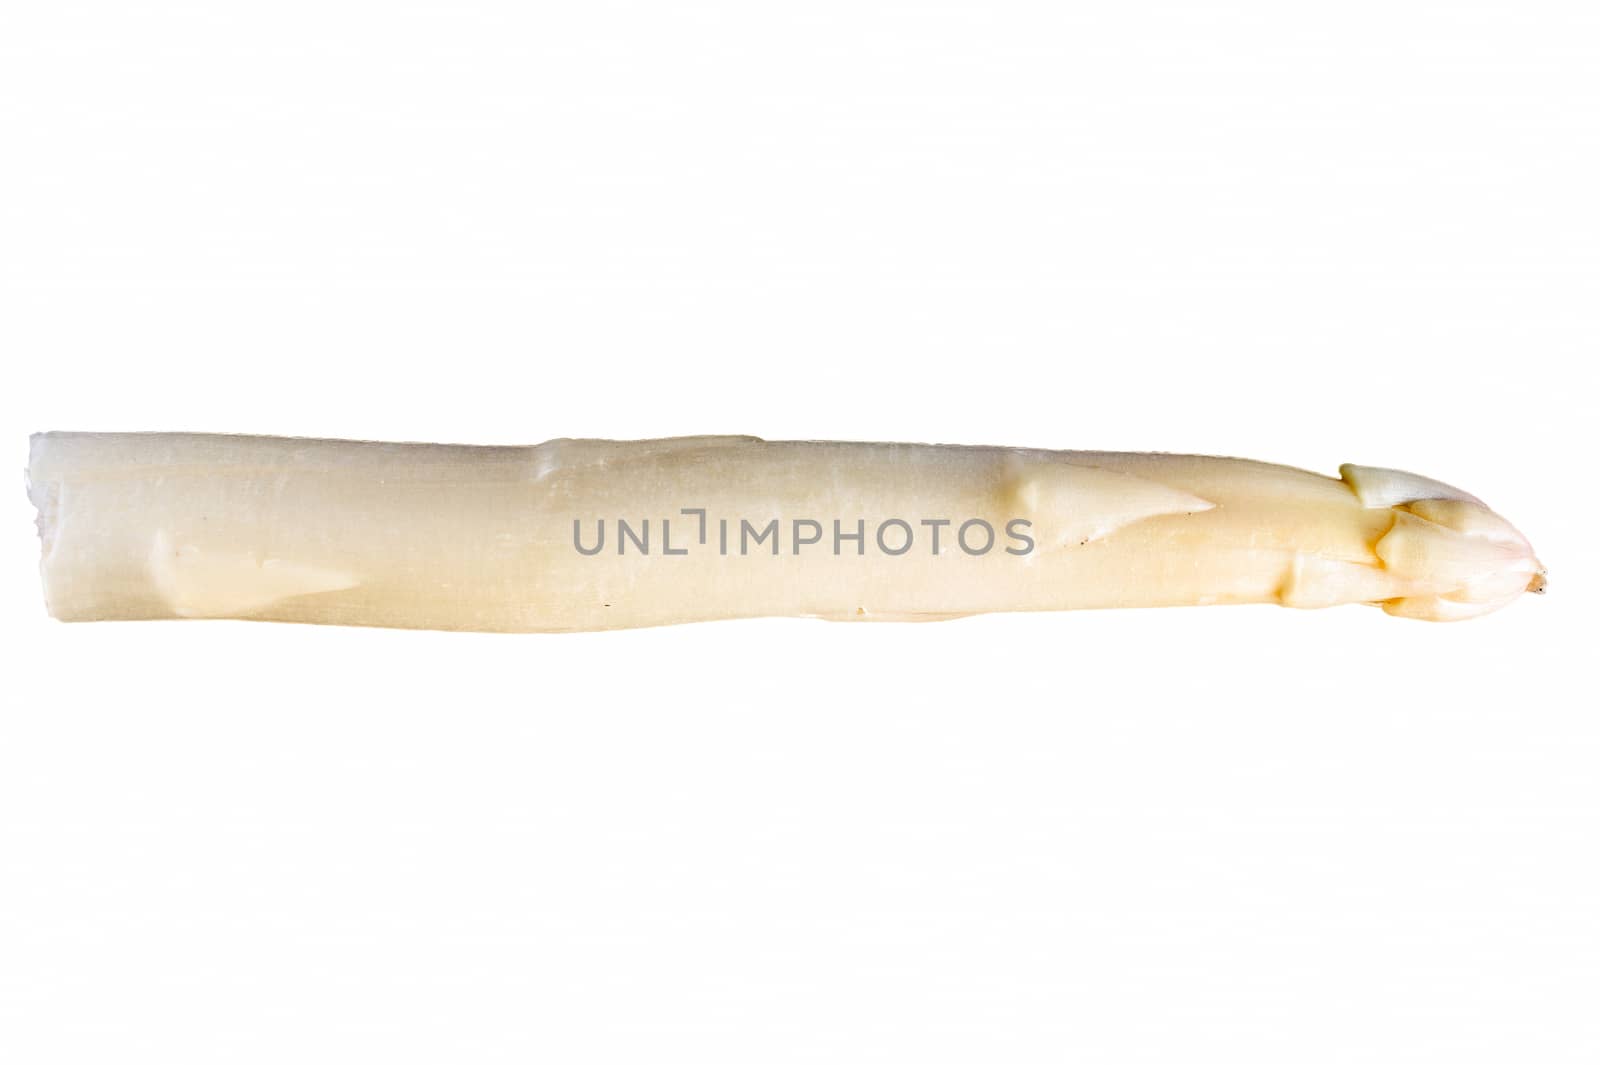 cut out white asparagus on a background